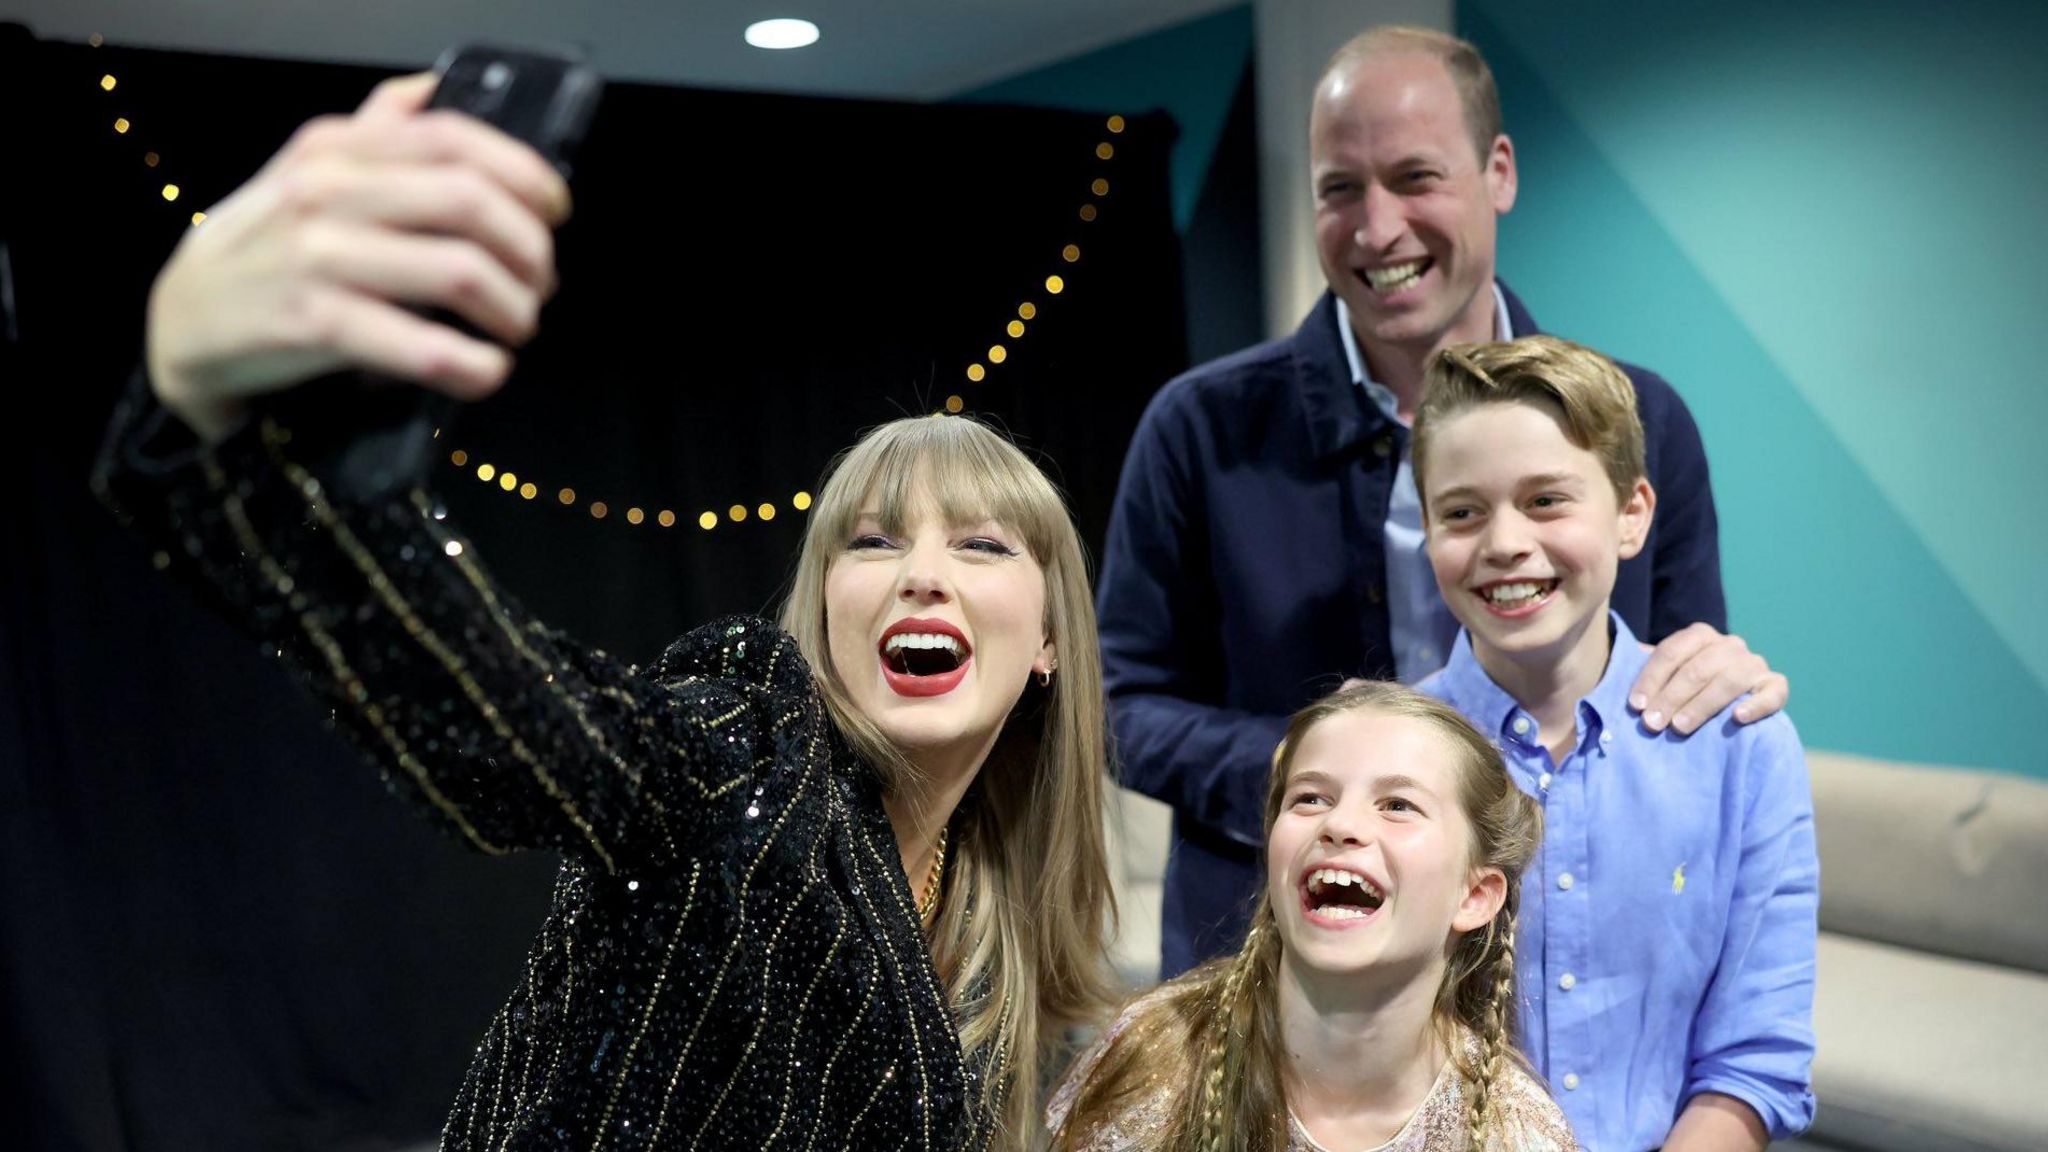 A picture of Taylor Swift with Prince William, Prince George and Princess Charlotte